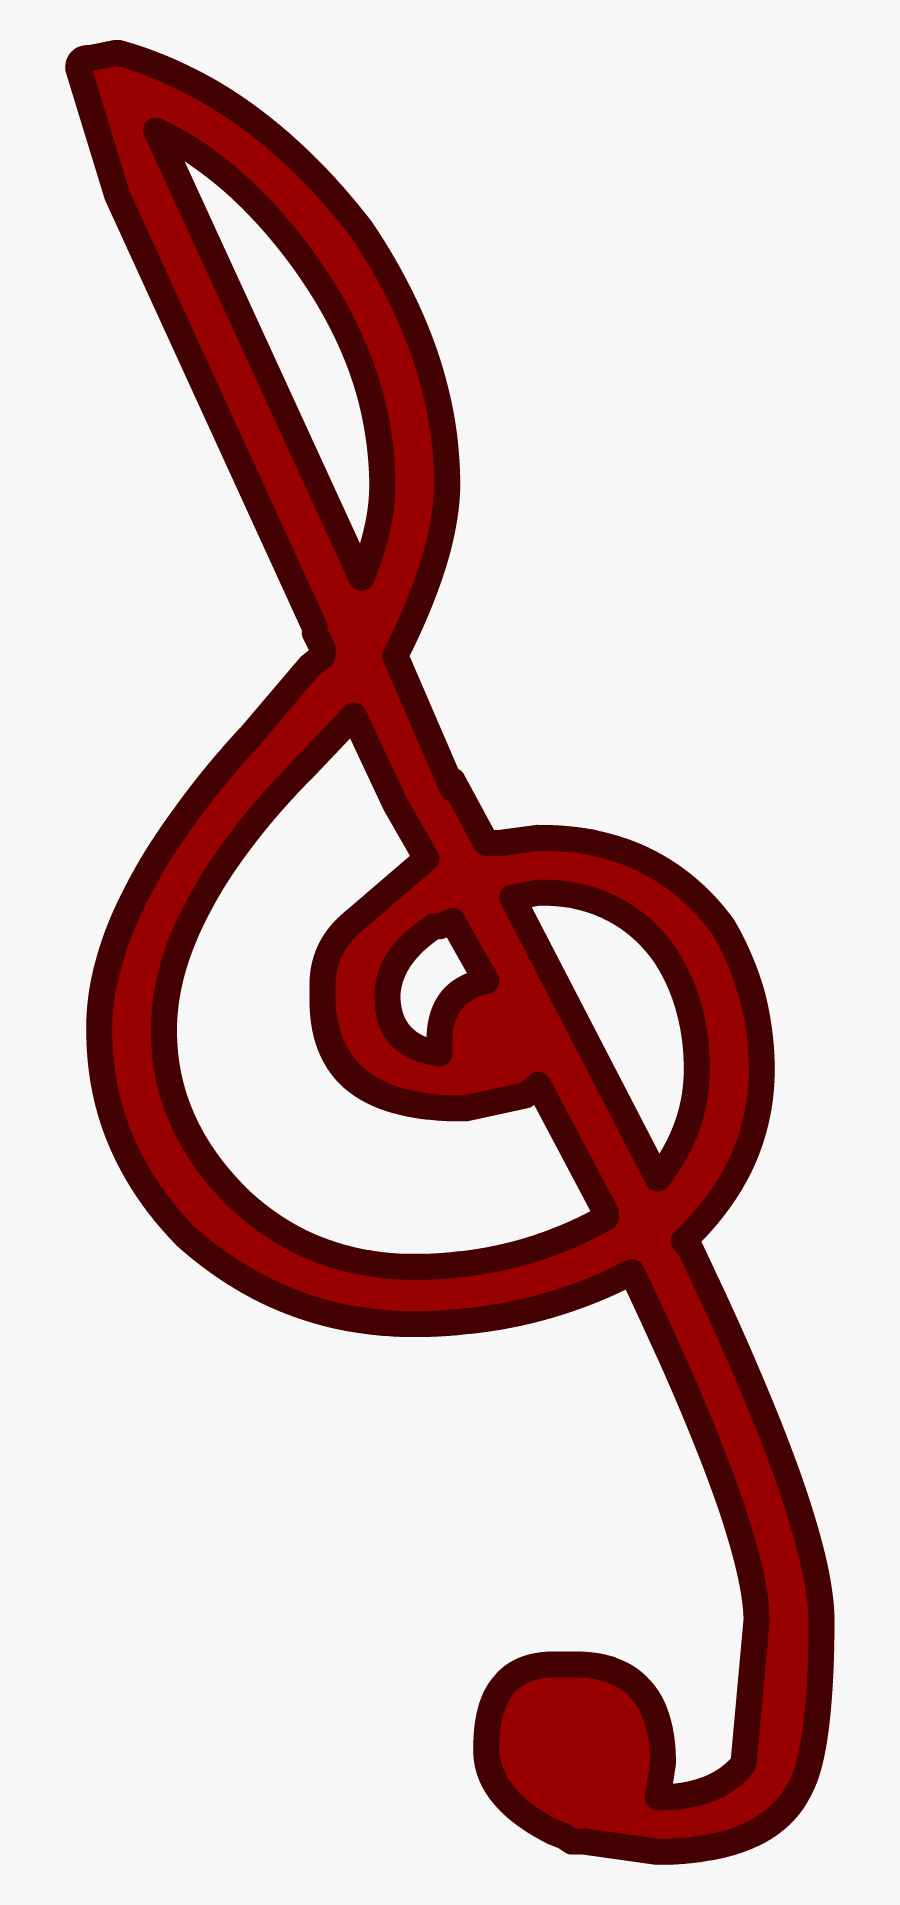 Club Penguin Rewritten Wiki - Treble Clef Red Png, Transparent Clipart